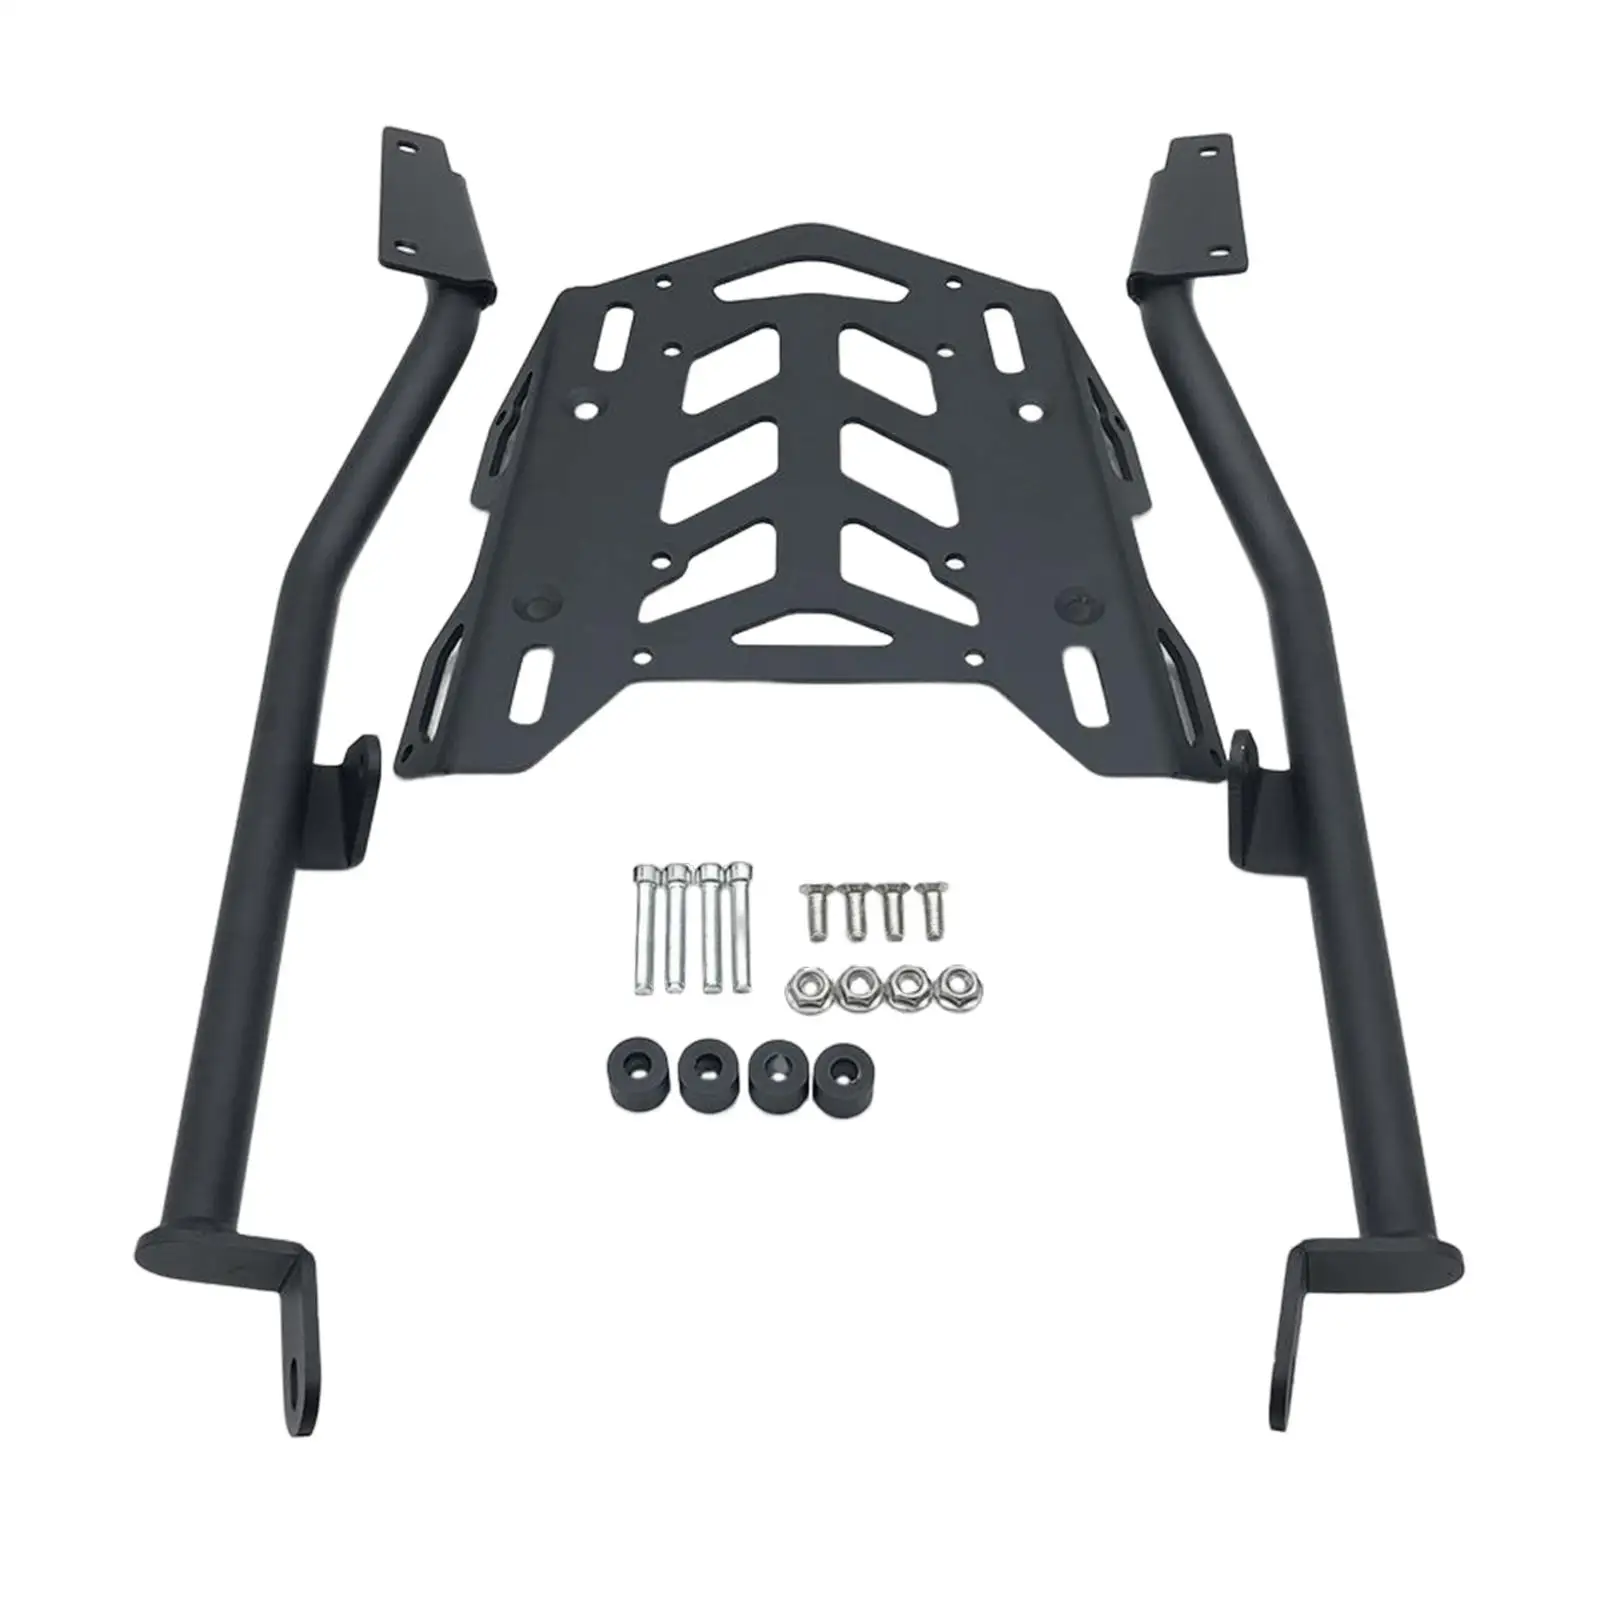 Rear Luggage Rack Heavy Dutdy Iron Saddlebag Cargo  Bracket Support  Carrier for Yamaha /21+ Accessories